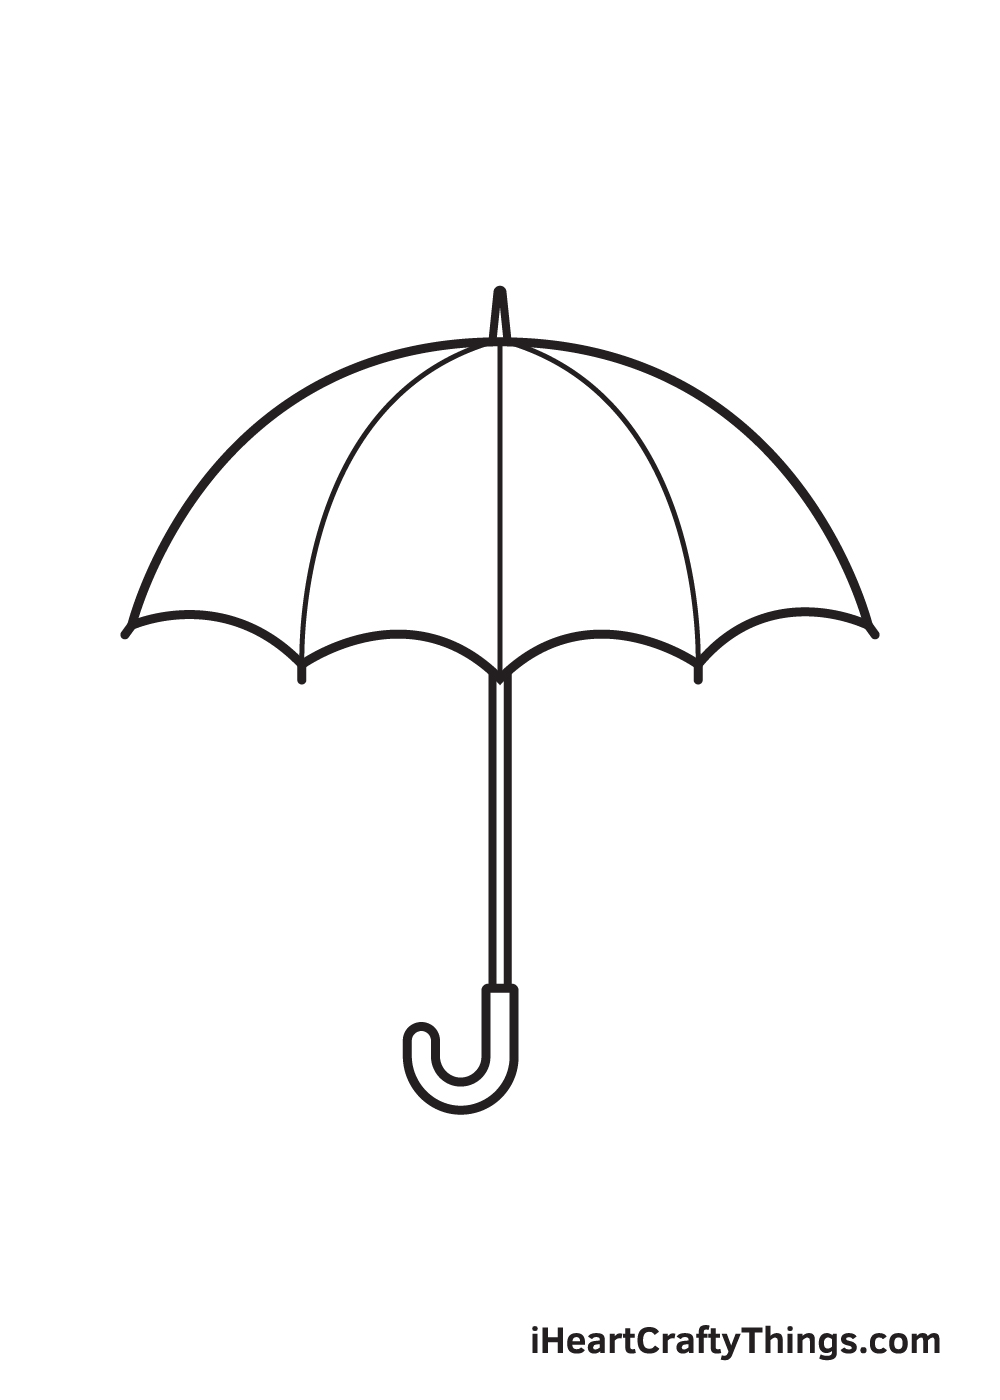 Umbrella protects from rain sketch engraving vector illustration. T-shirt  apparel print design. Scratch board imitation. Black and white hand drawn  image. Stock Vector by ©AlexanderPokusay 350242676